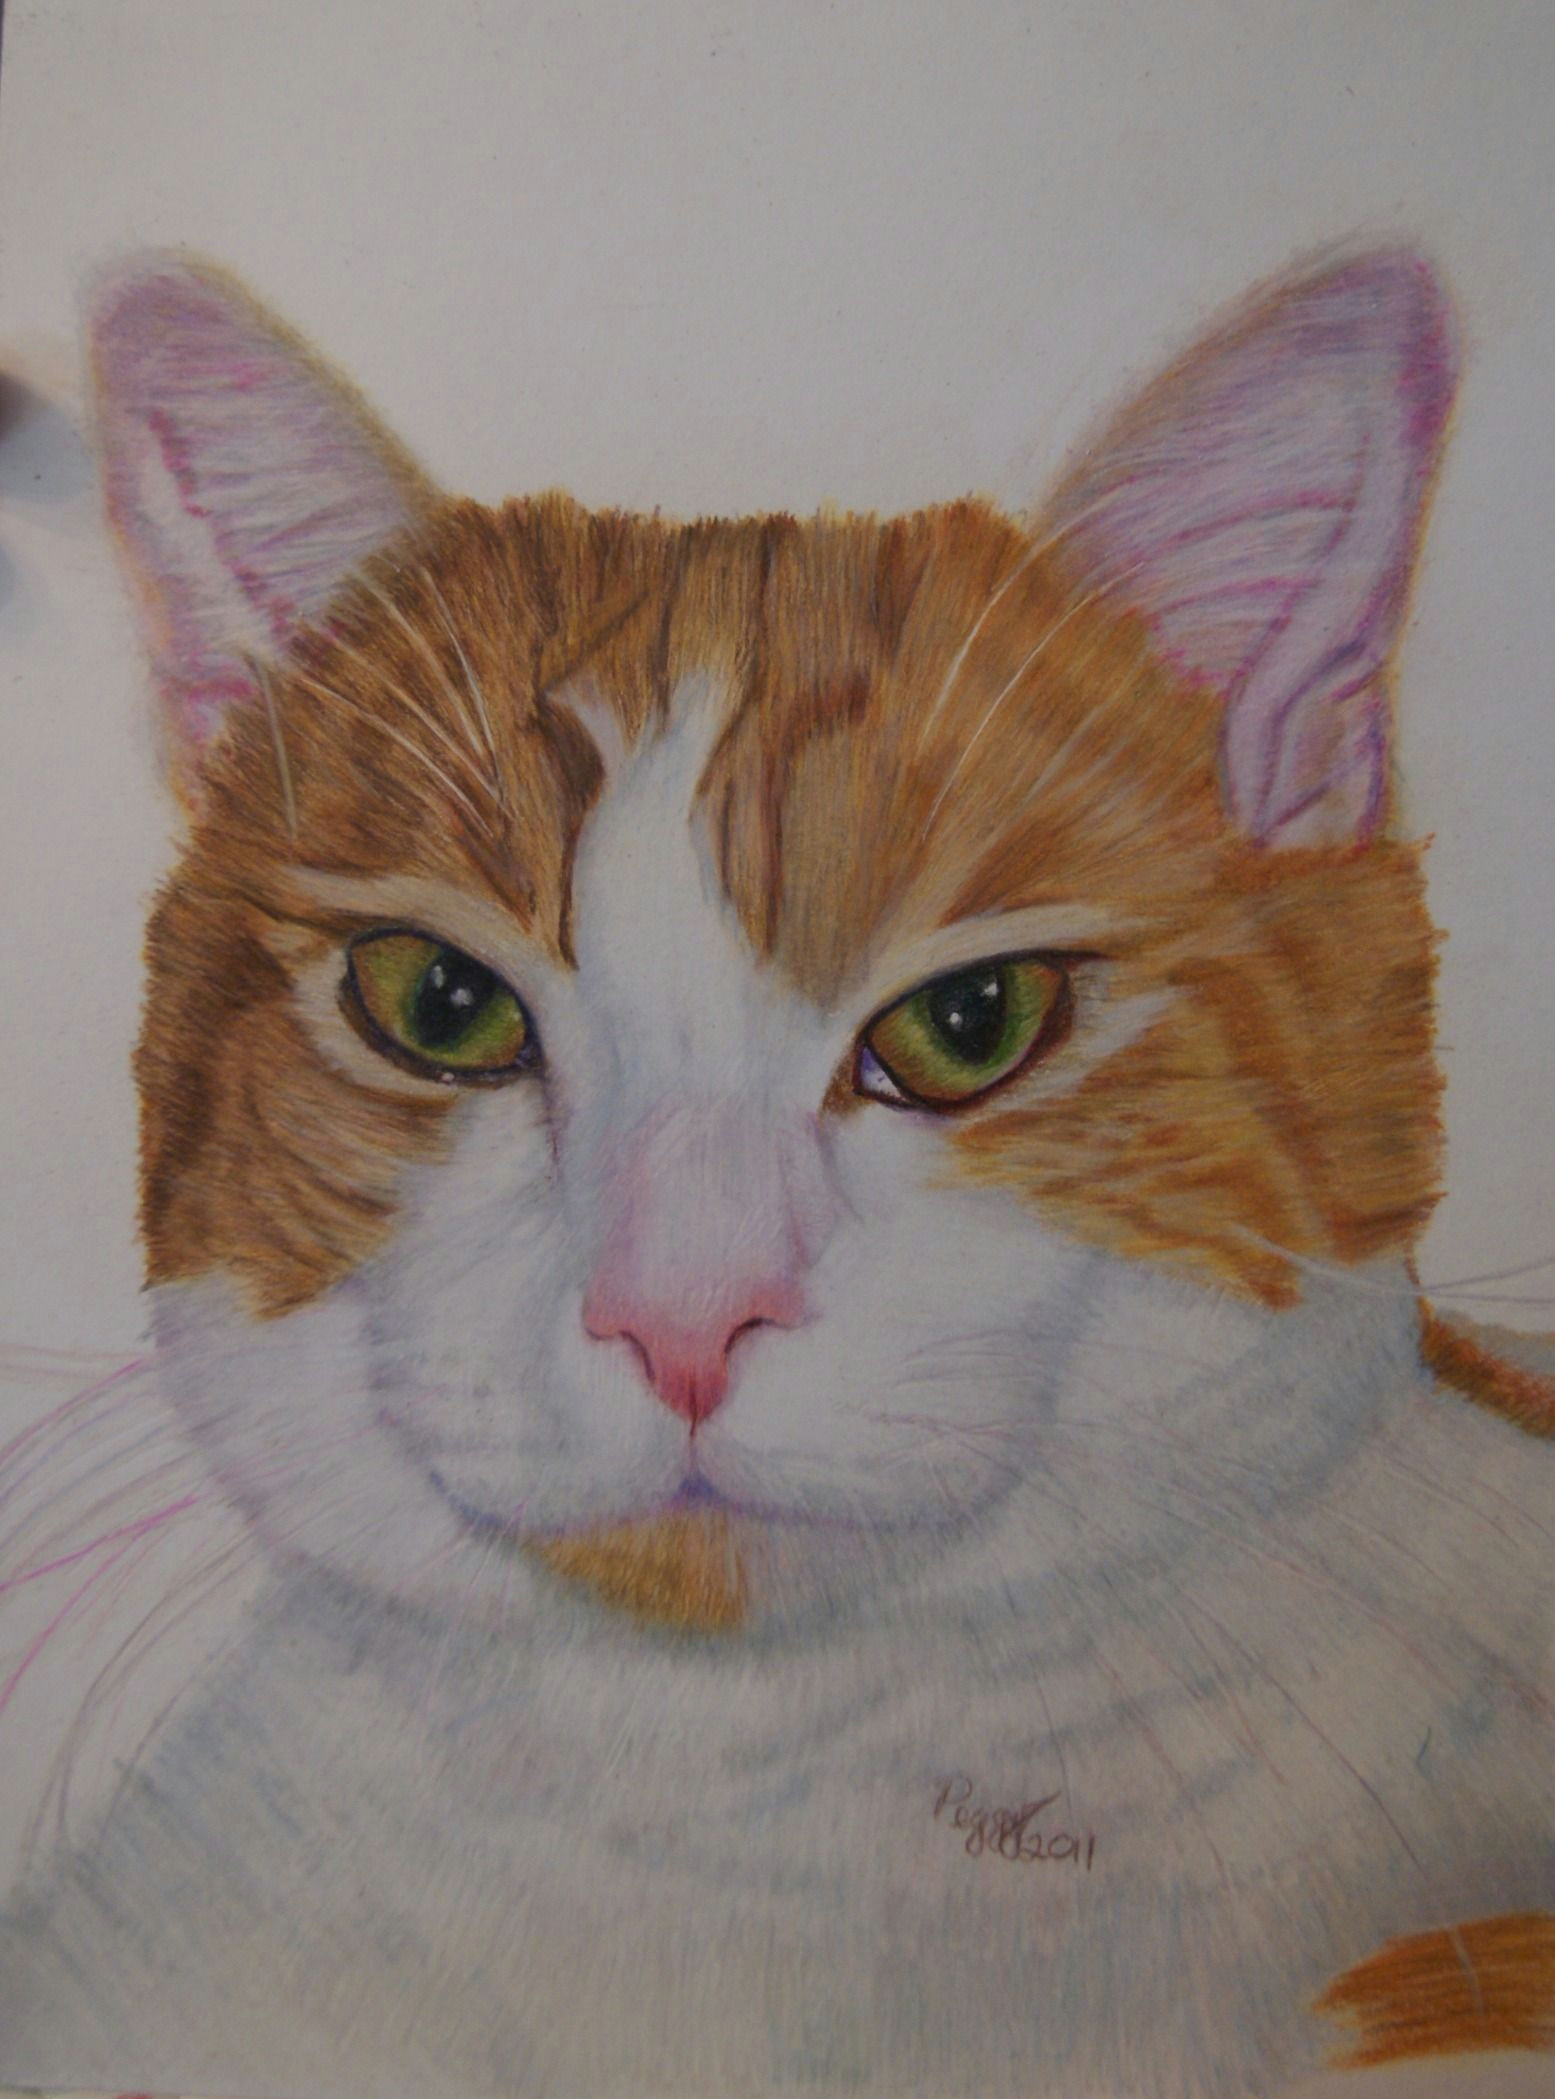 a colored pencil drawing ofjean luc my niece s cat she lost him far too young and i drew this as a special memorial for her wookey bear